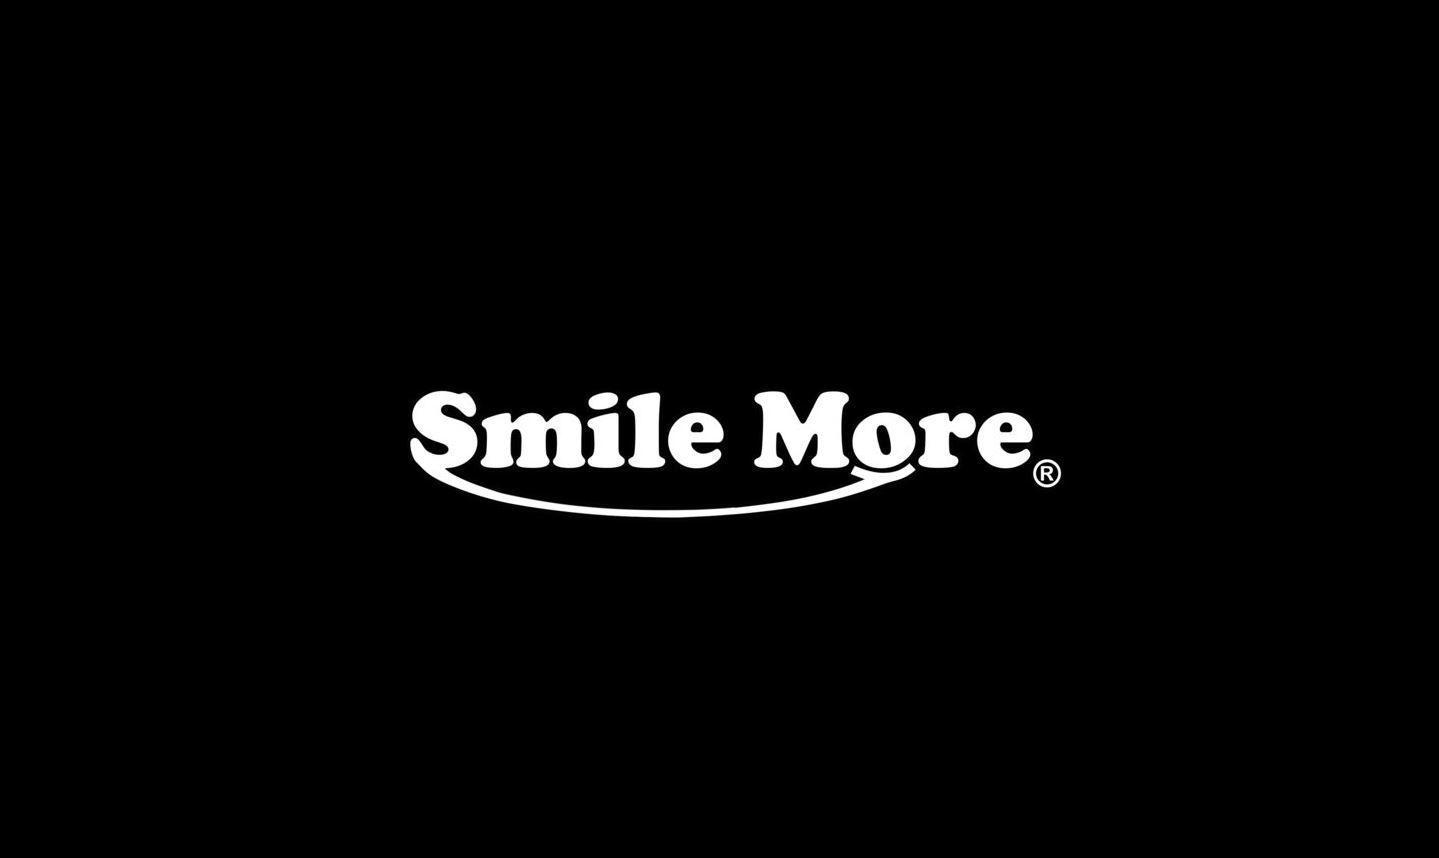 Smile More Wallpapers - Top Free Smile